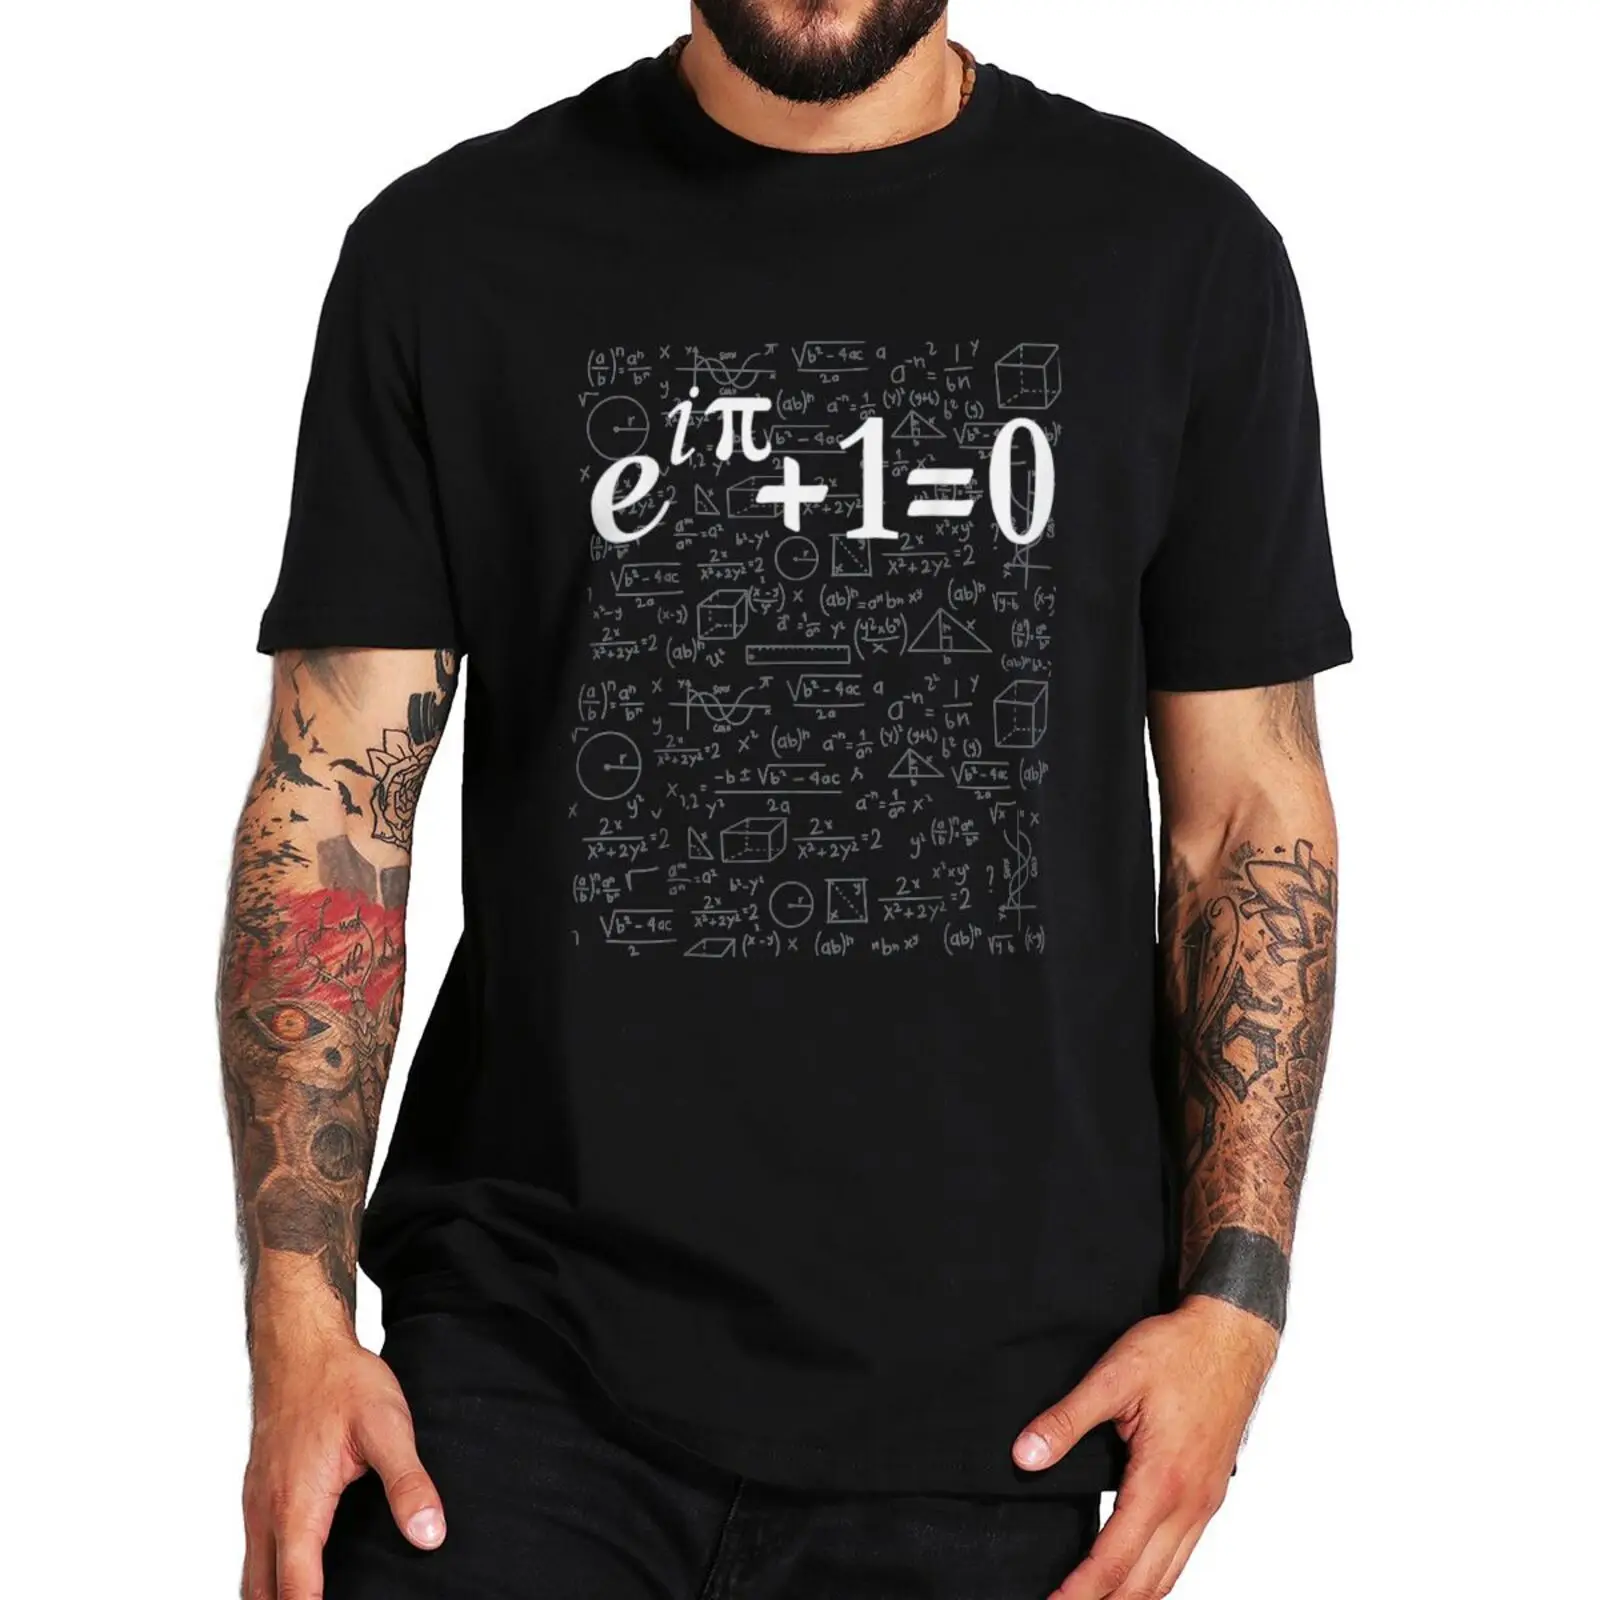 Euler's Identity Math Science Geek Nerd T Shirt The Equation Funny Novelty Tshirt For Men Women 100% Cotton EU Size Camiseta  - buy with discount